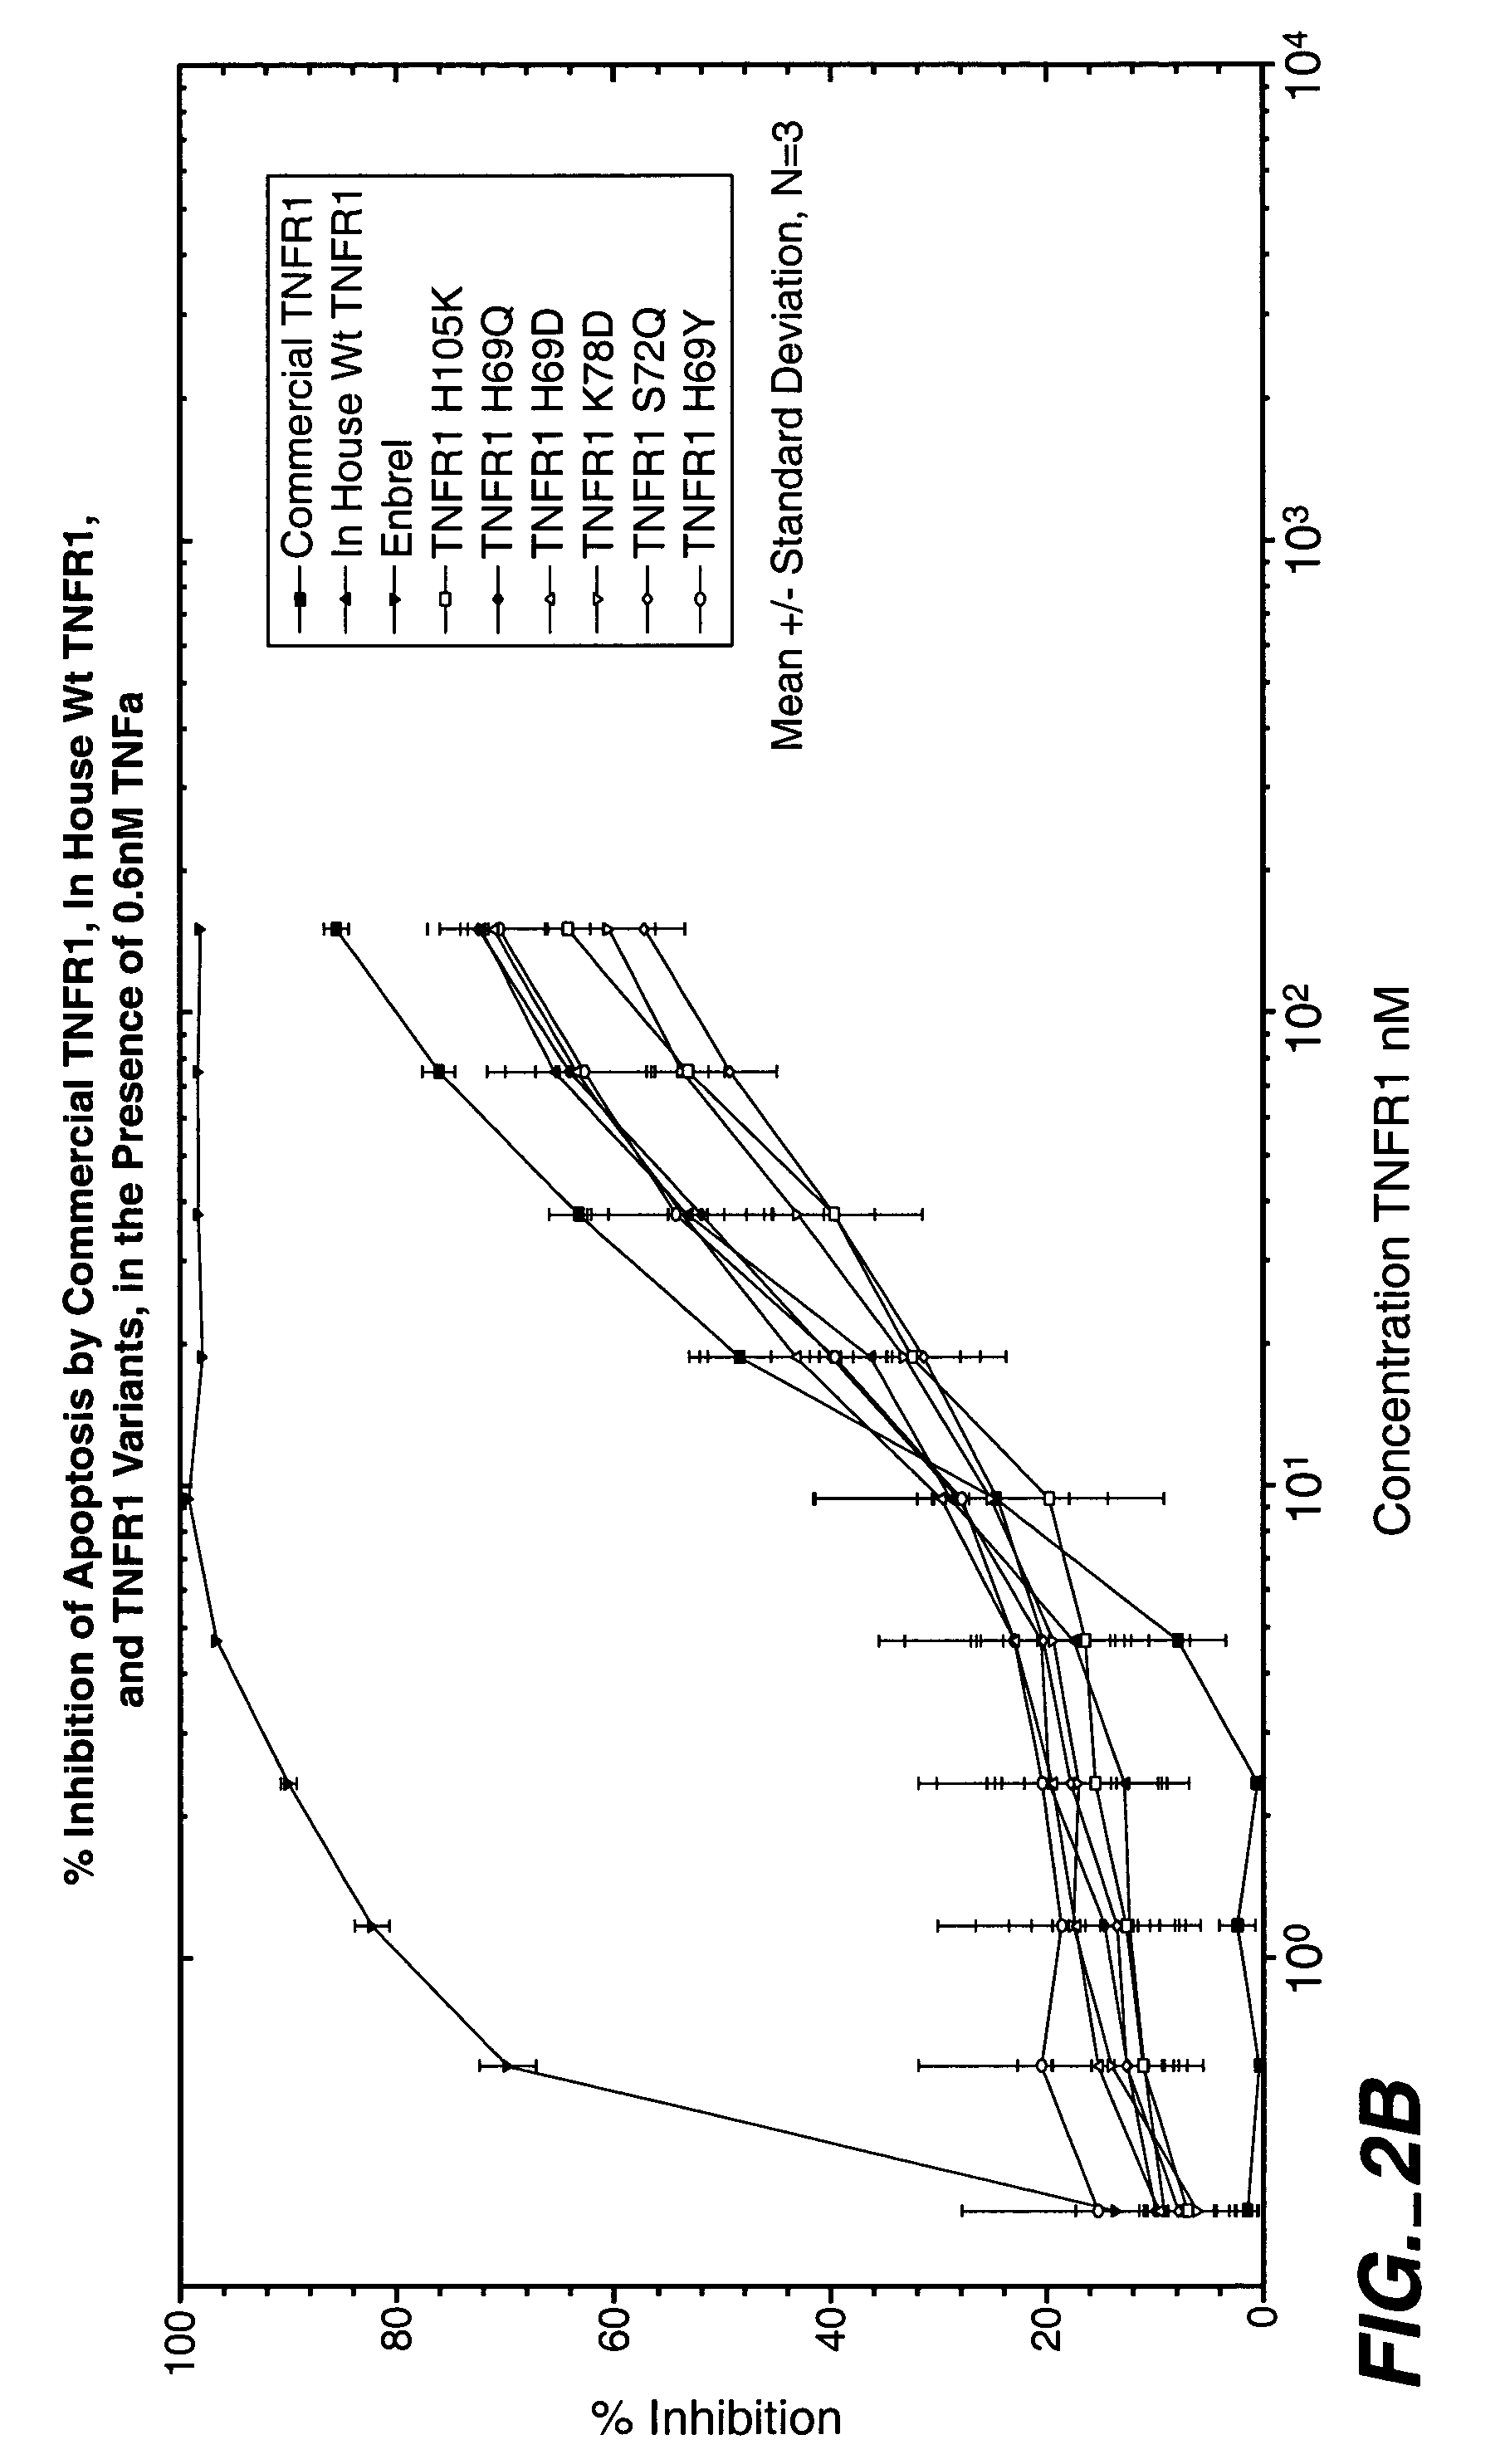 Protein based tumor necrosis factor-receptor variants for the treatment of TNF related disorders